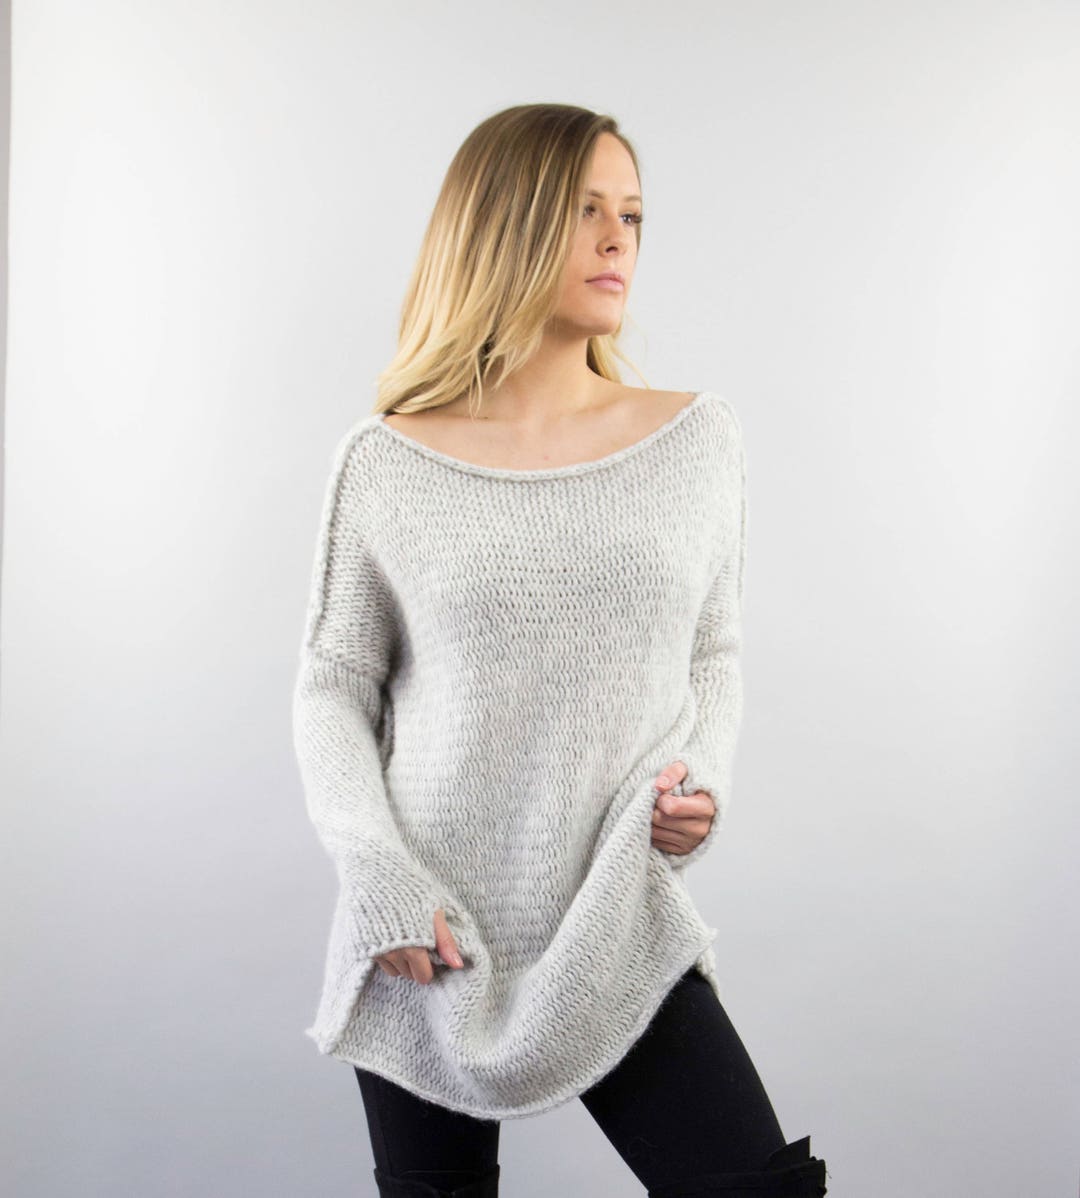 Sweater for Woman. Alpaca Slouchy Knit Sweater Dress .thumb - Etsy